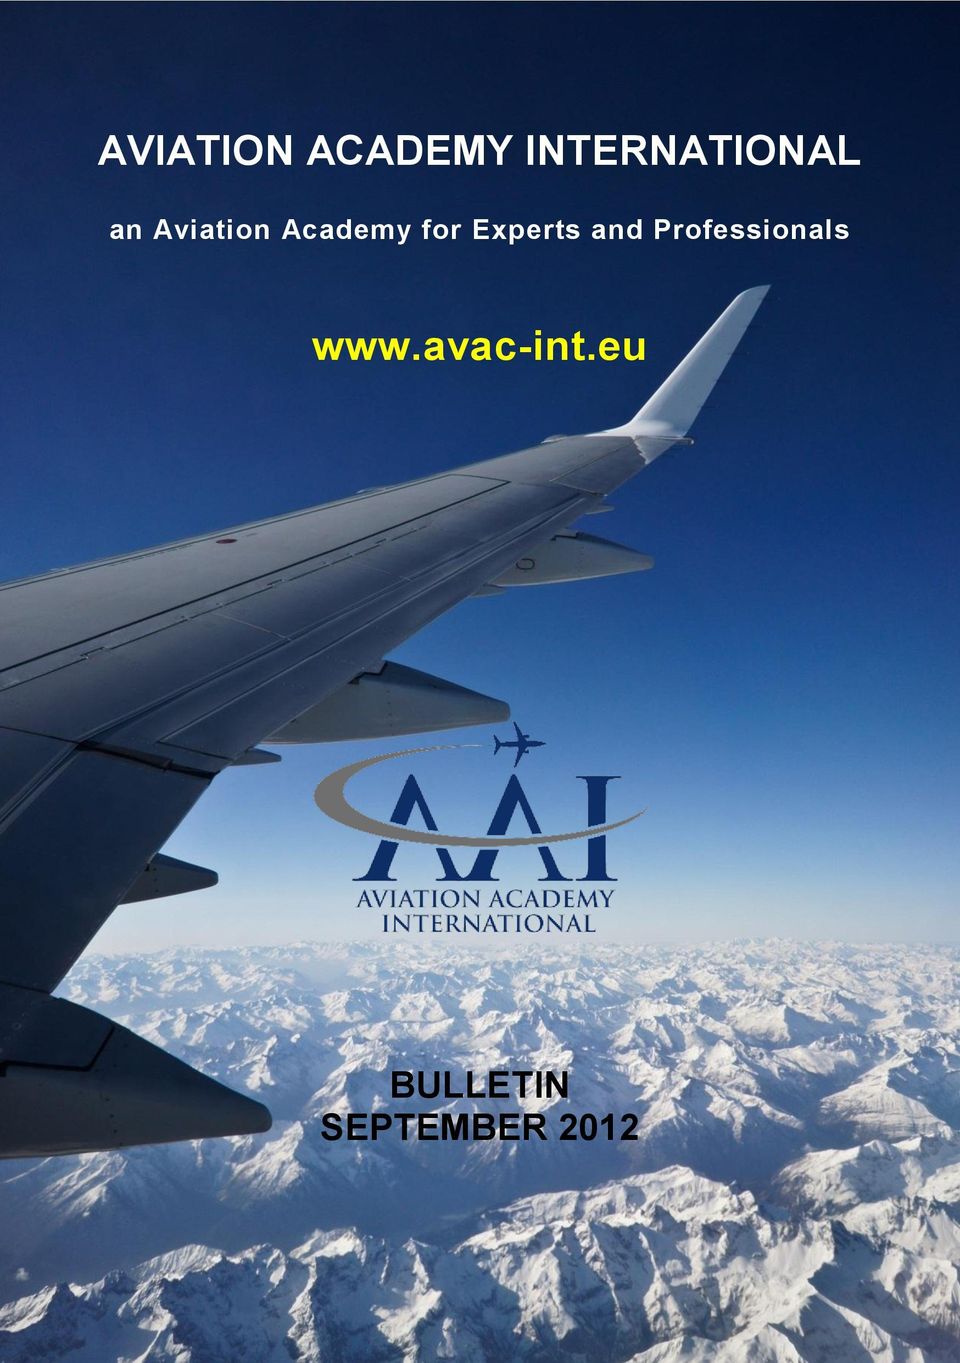 Academy for Experts and